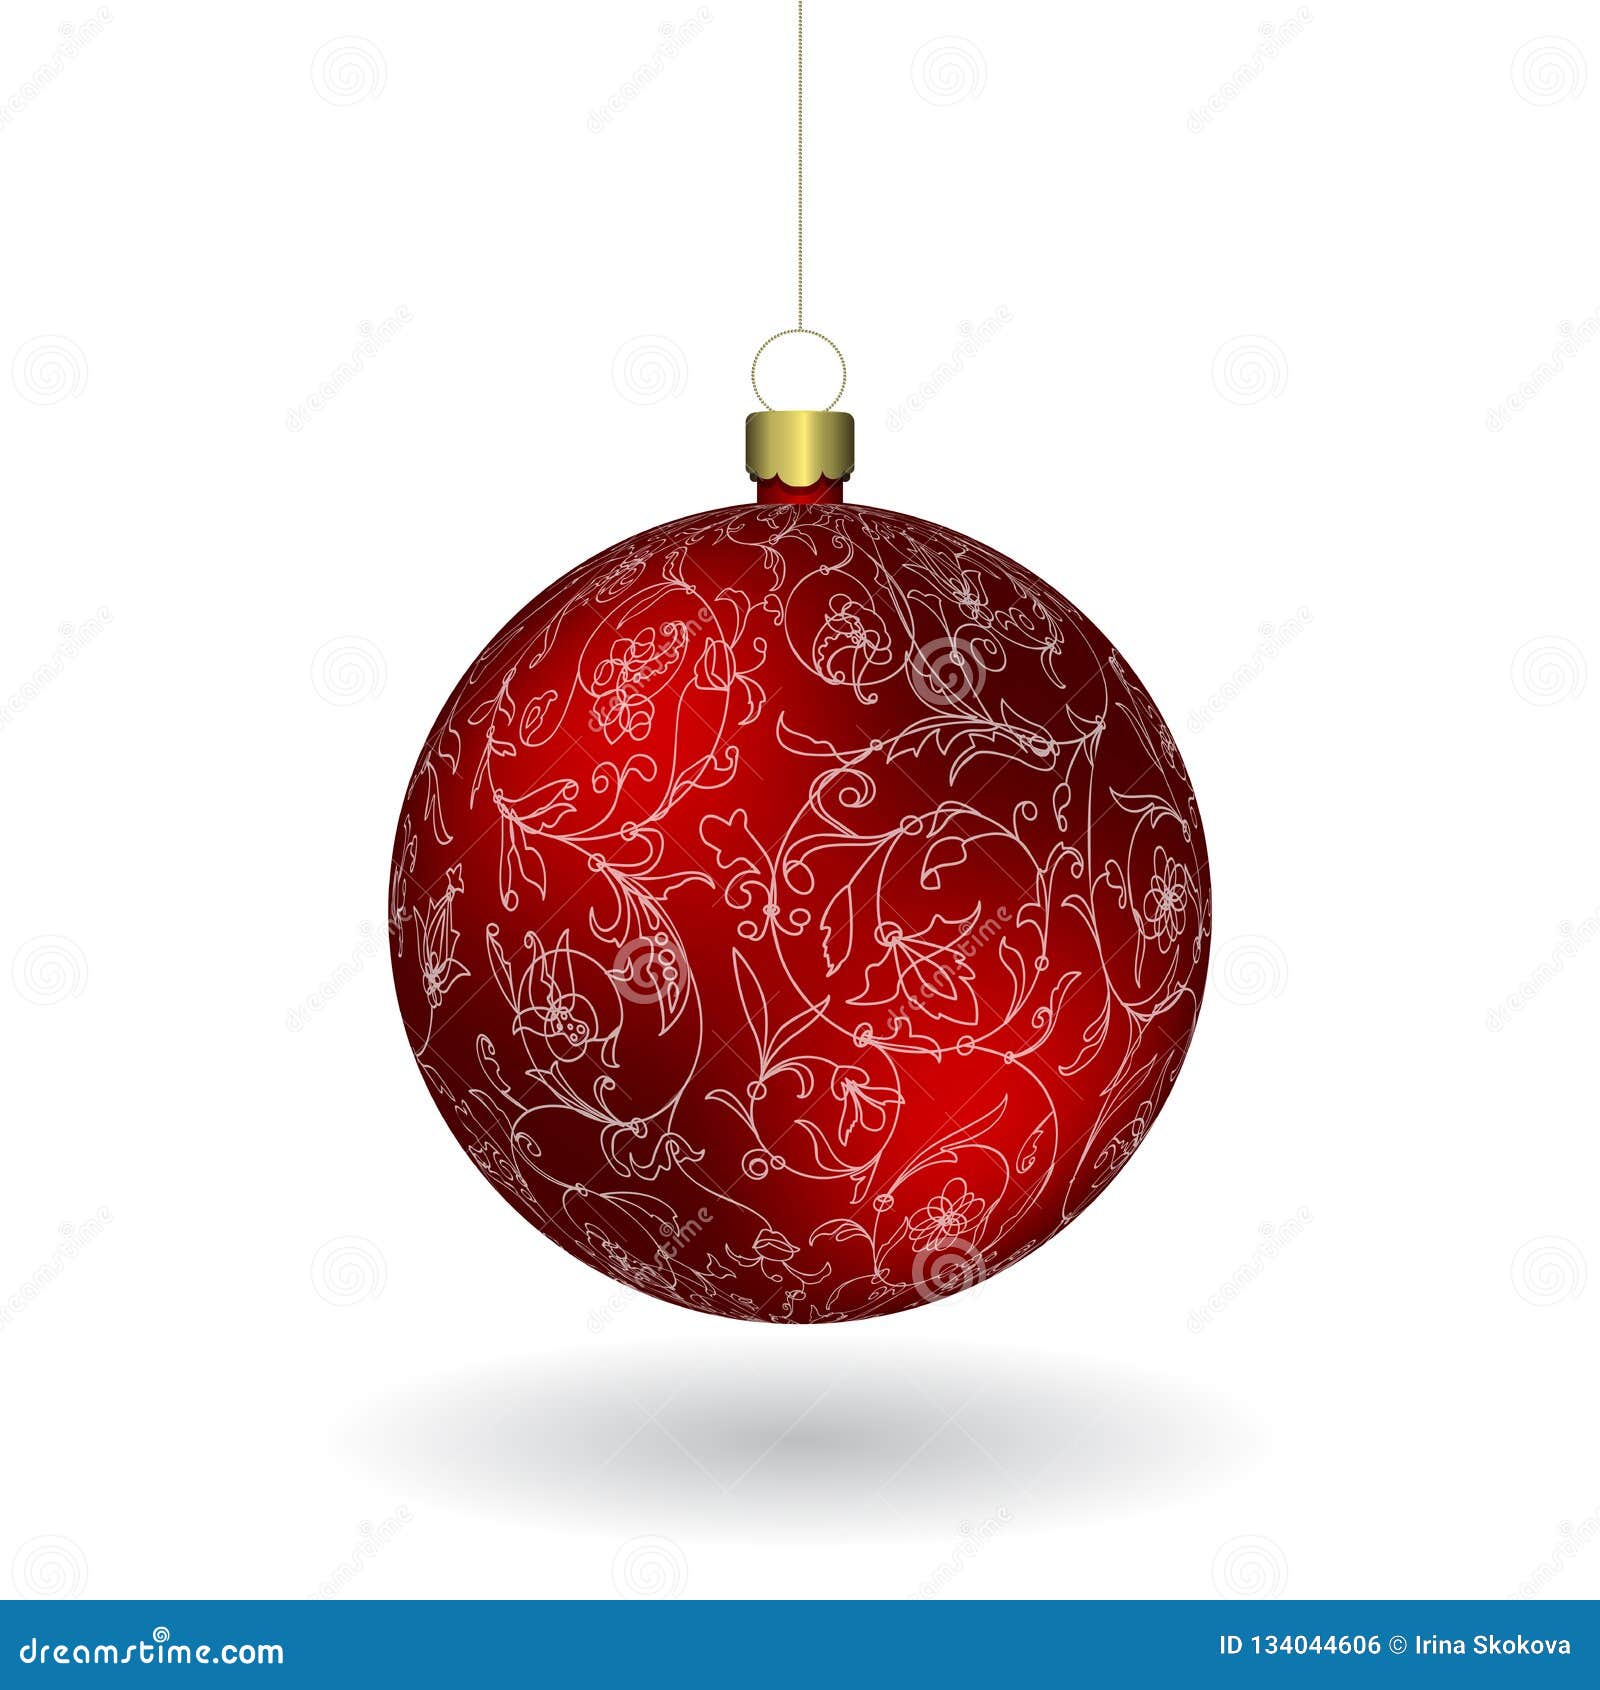 red christmass ball hanging on a golden chain